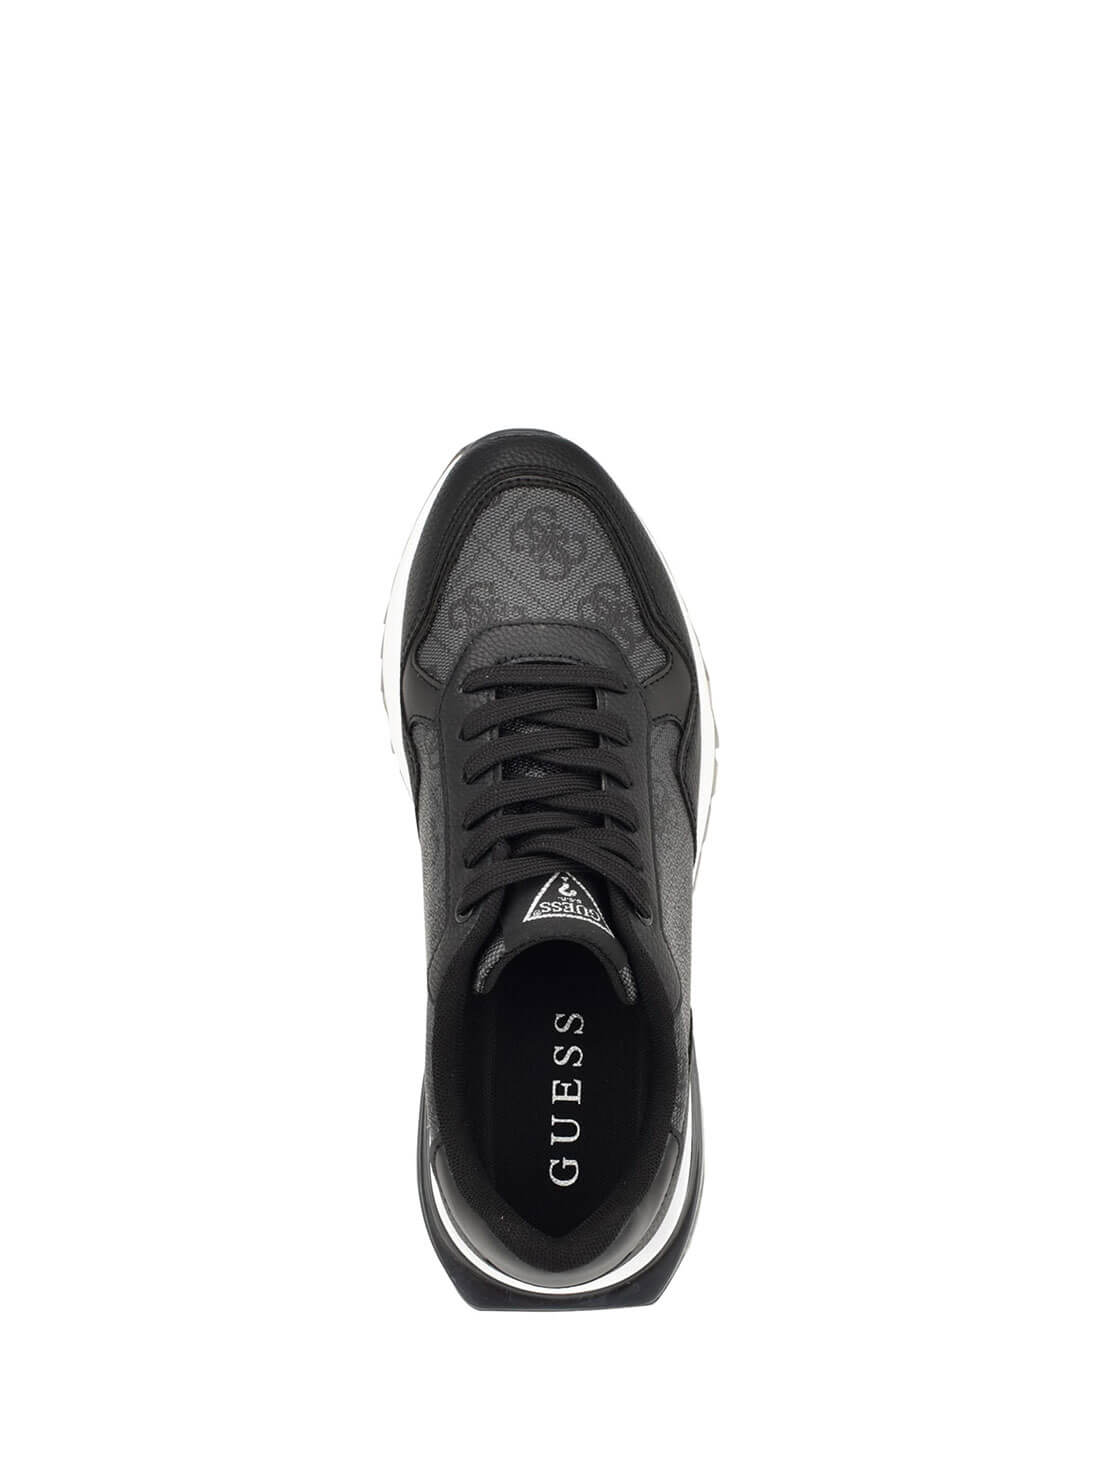 Black Melany Sneakers | GUESS Women's Shoes | top view